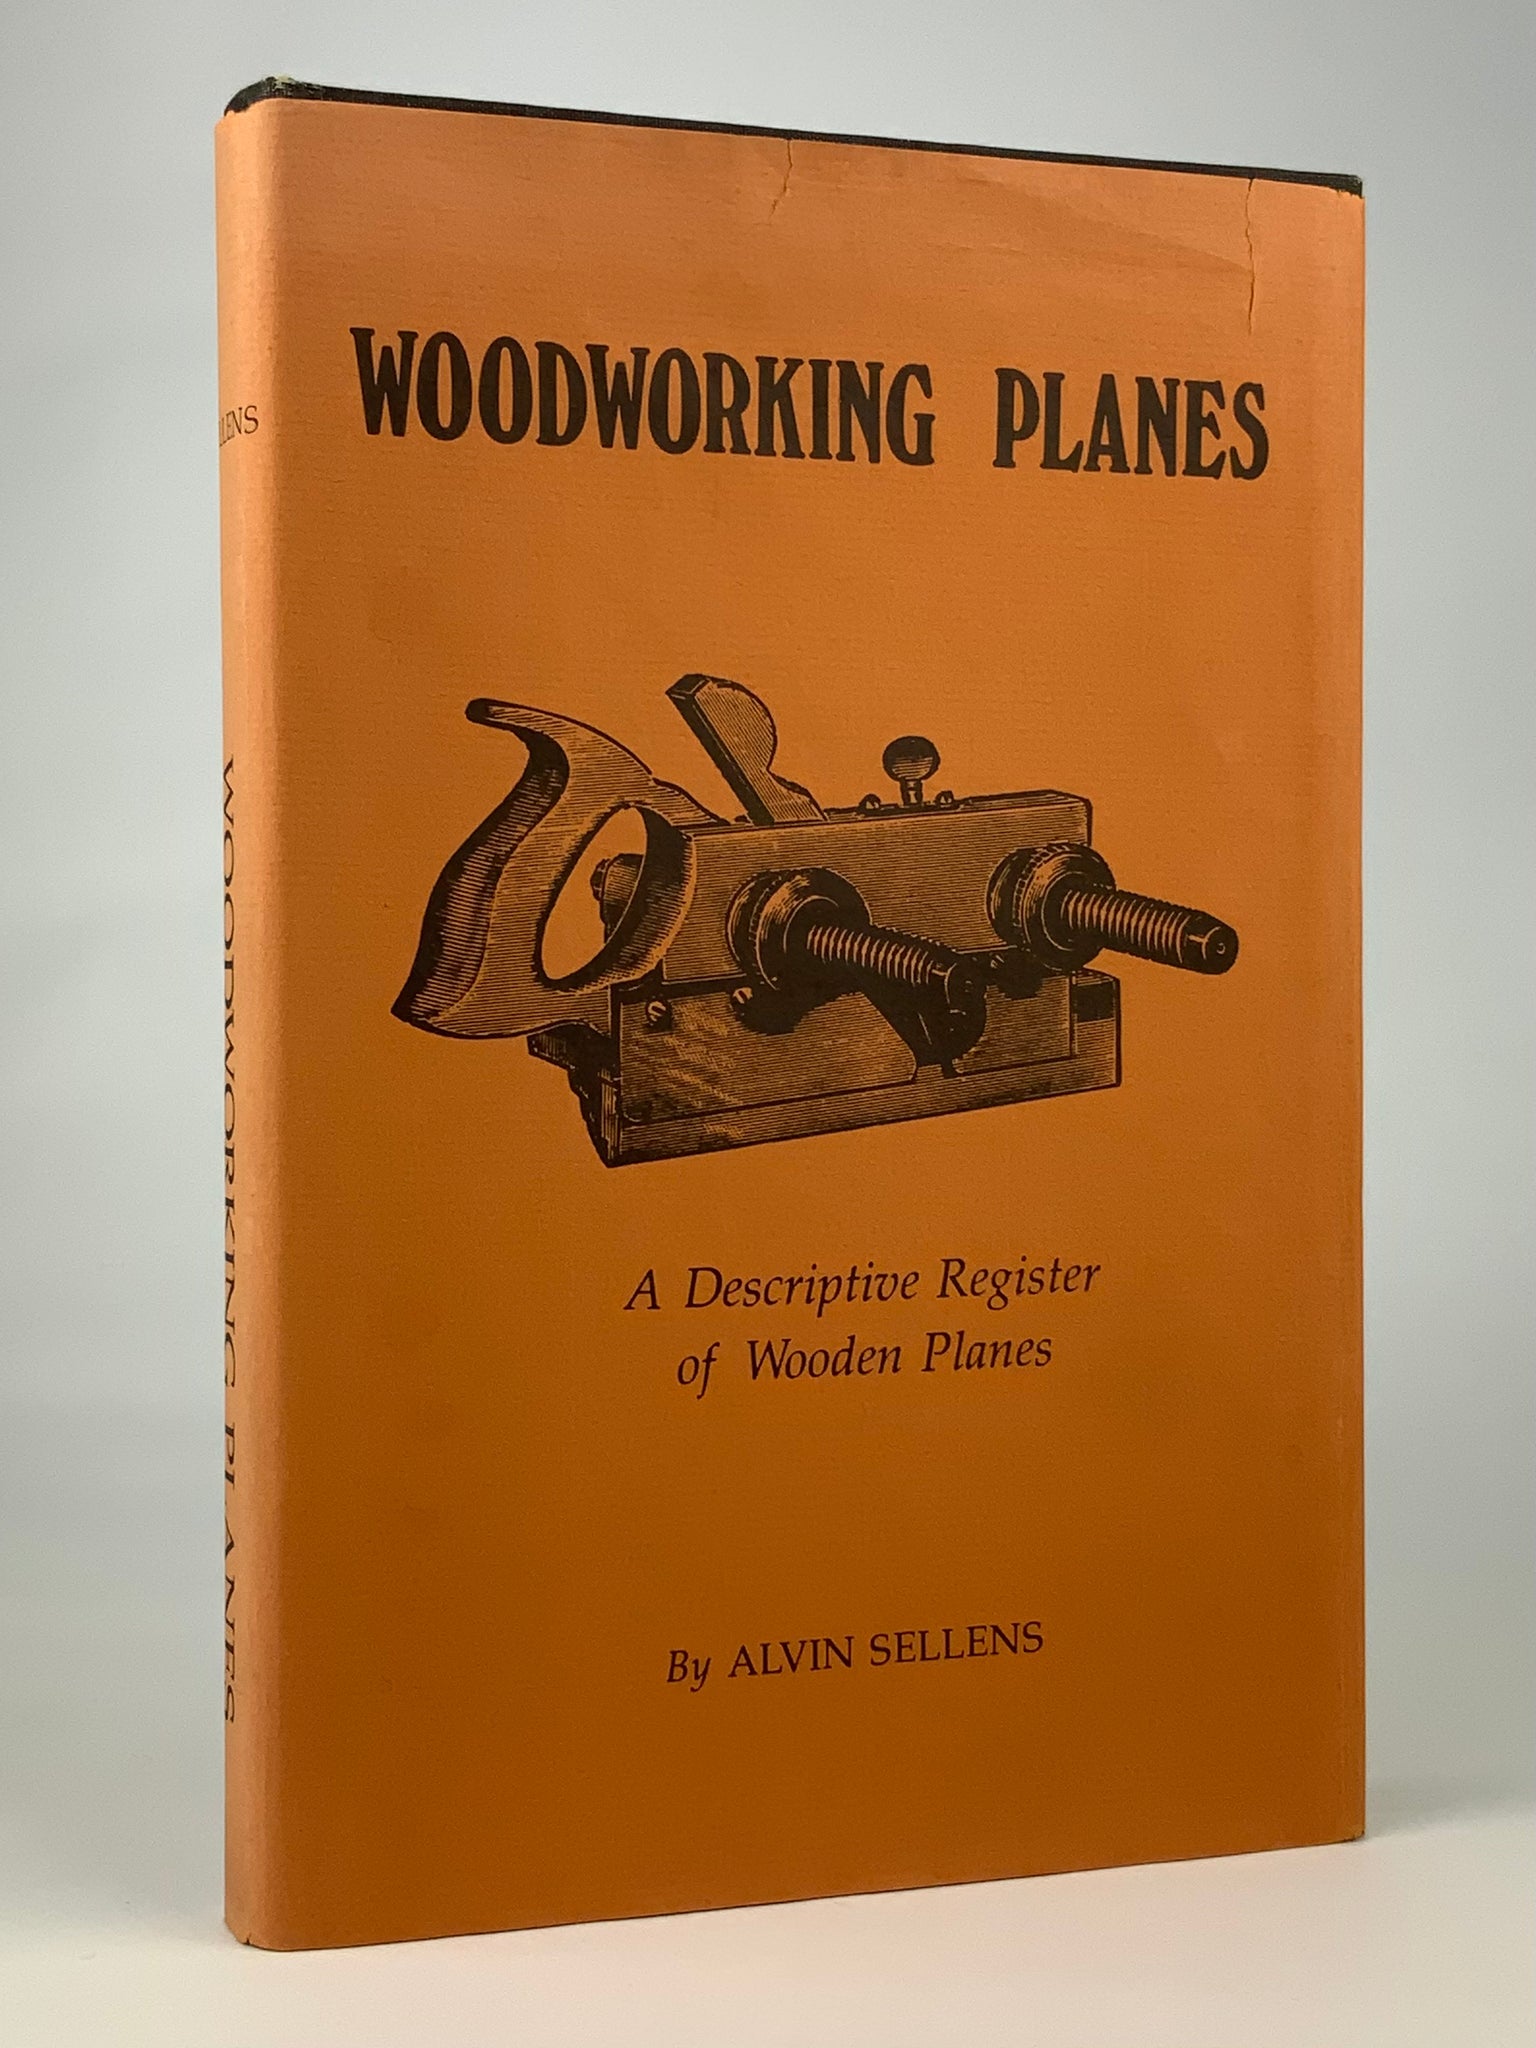 Woodworking Planes